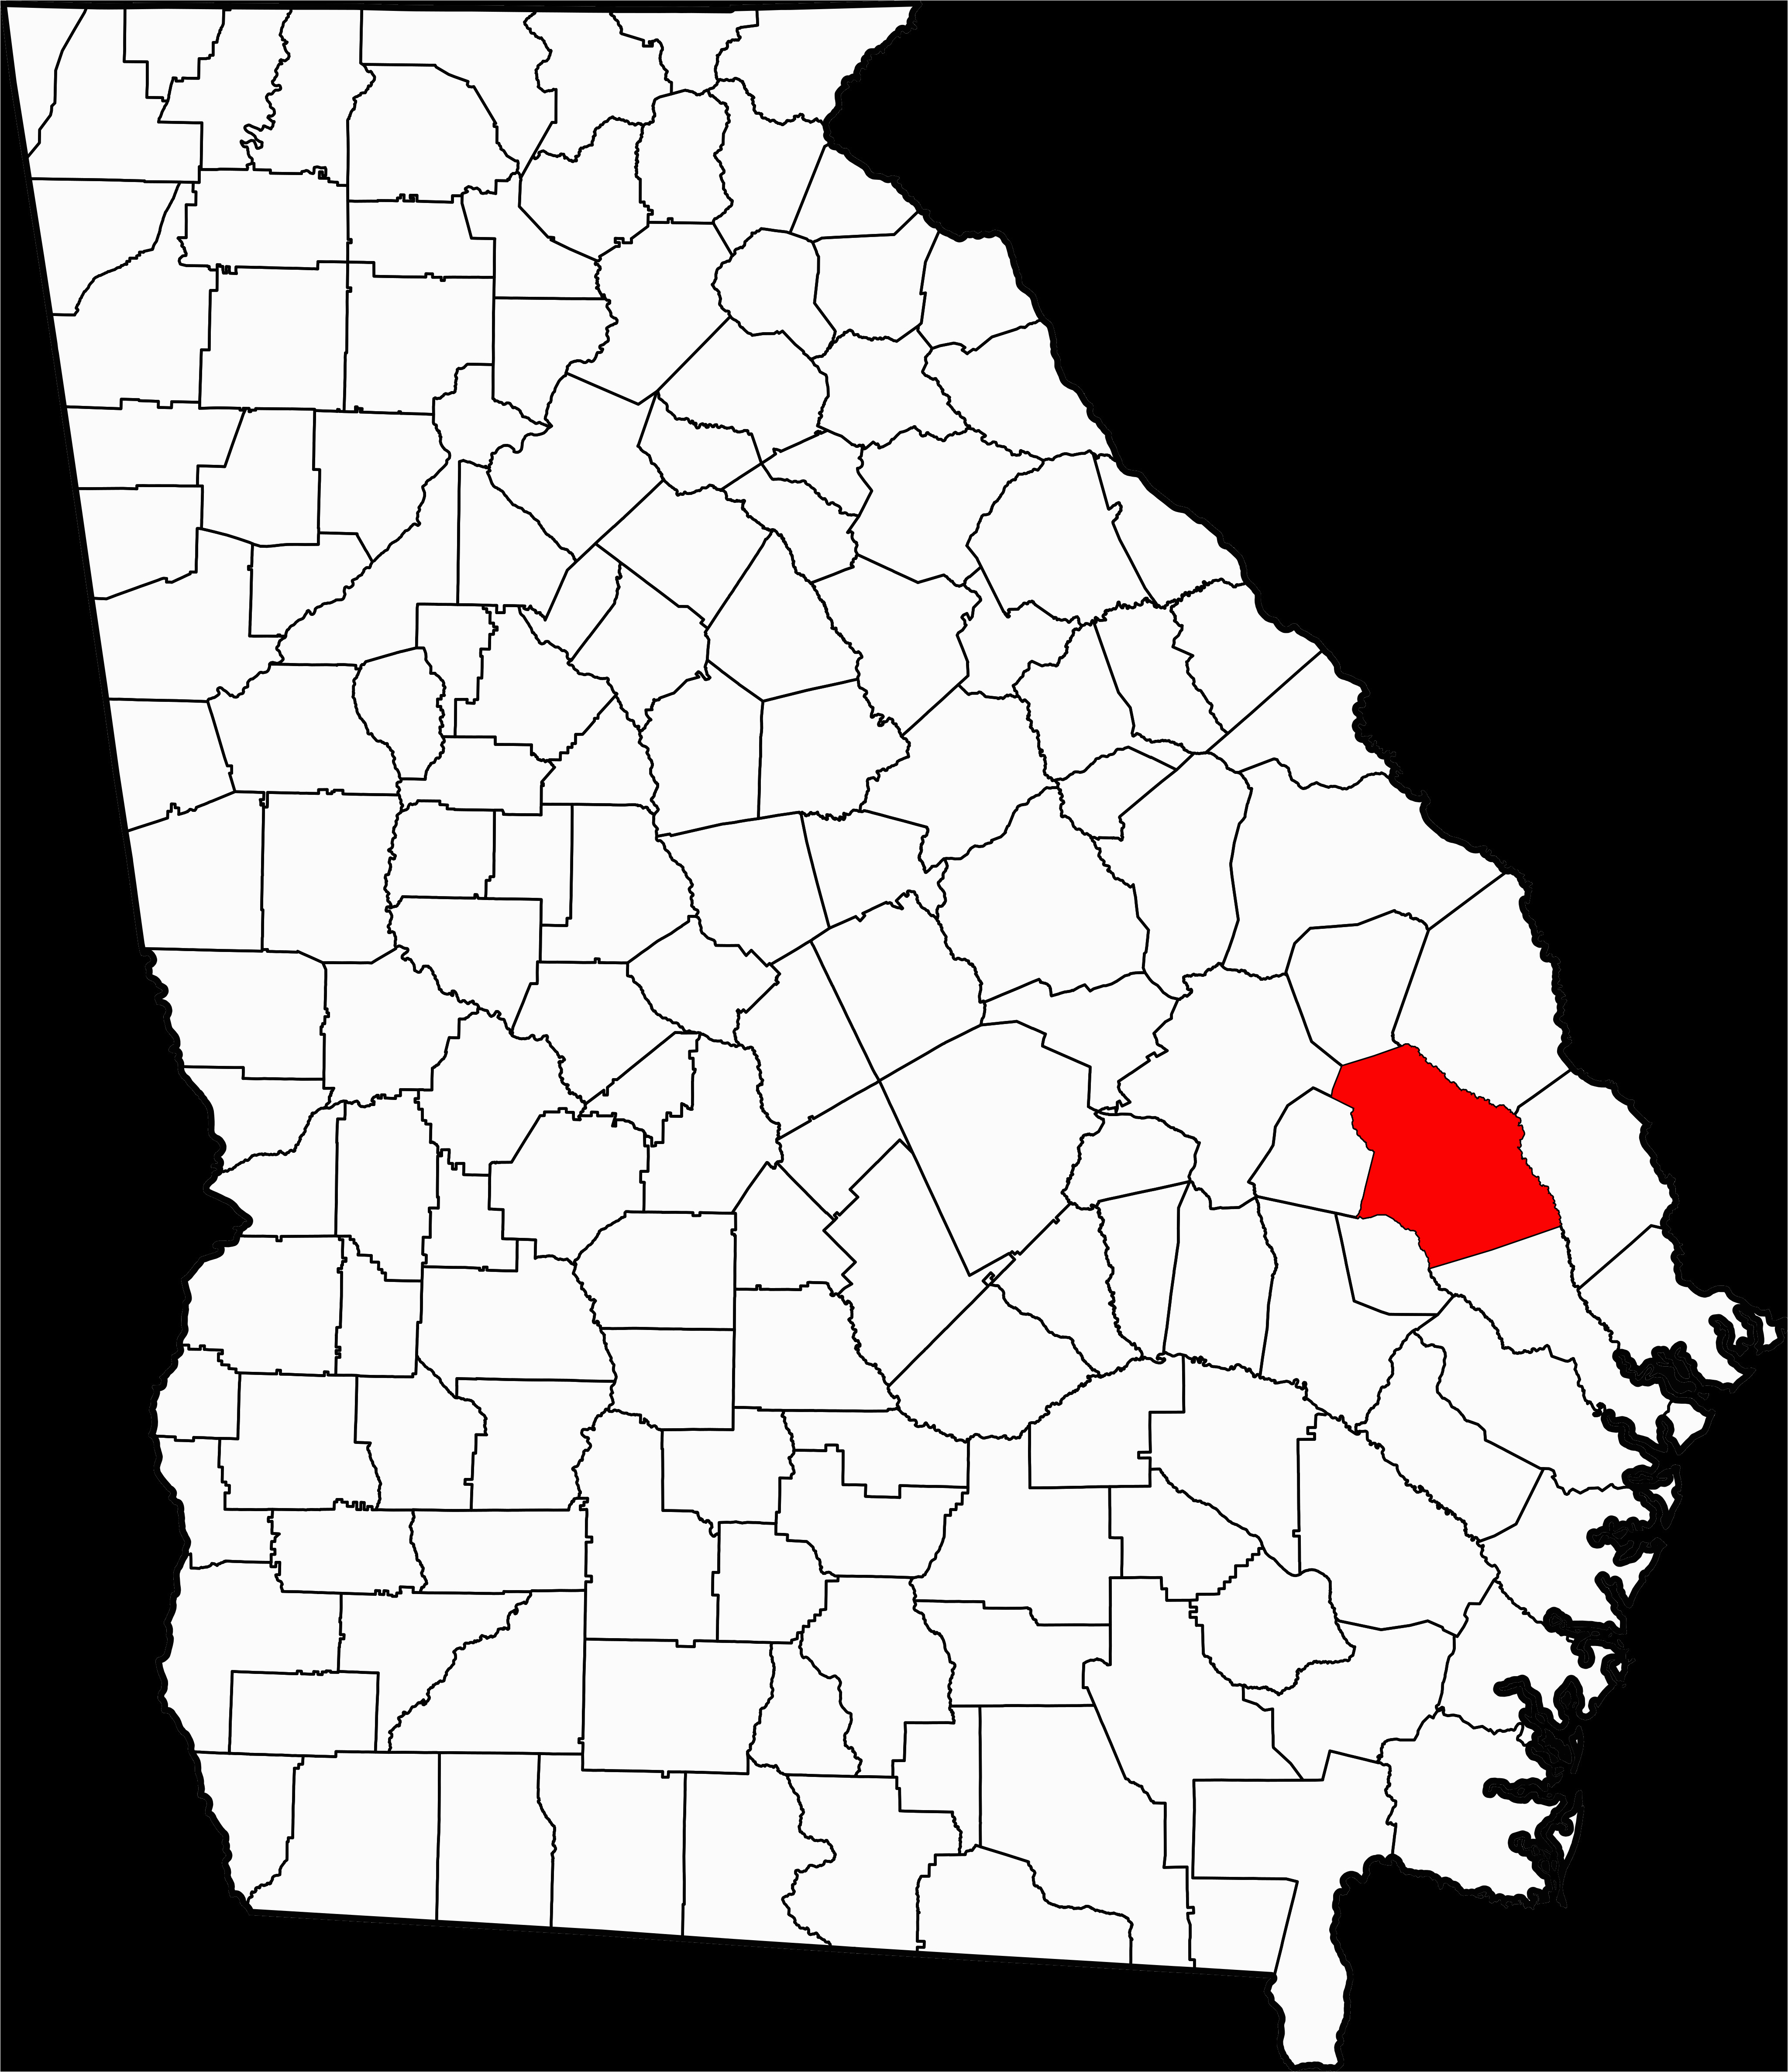 Map Of Counties In Georgia File Map Of Georgia Highlighting Bulloch County Svg Wikimedia Commons